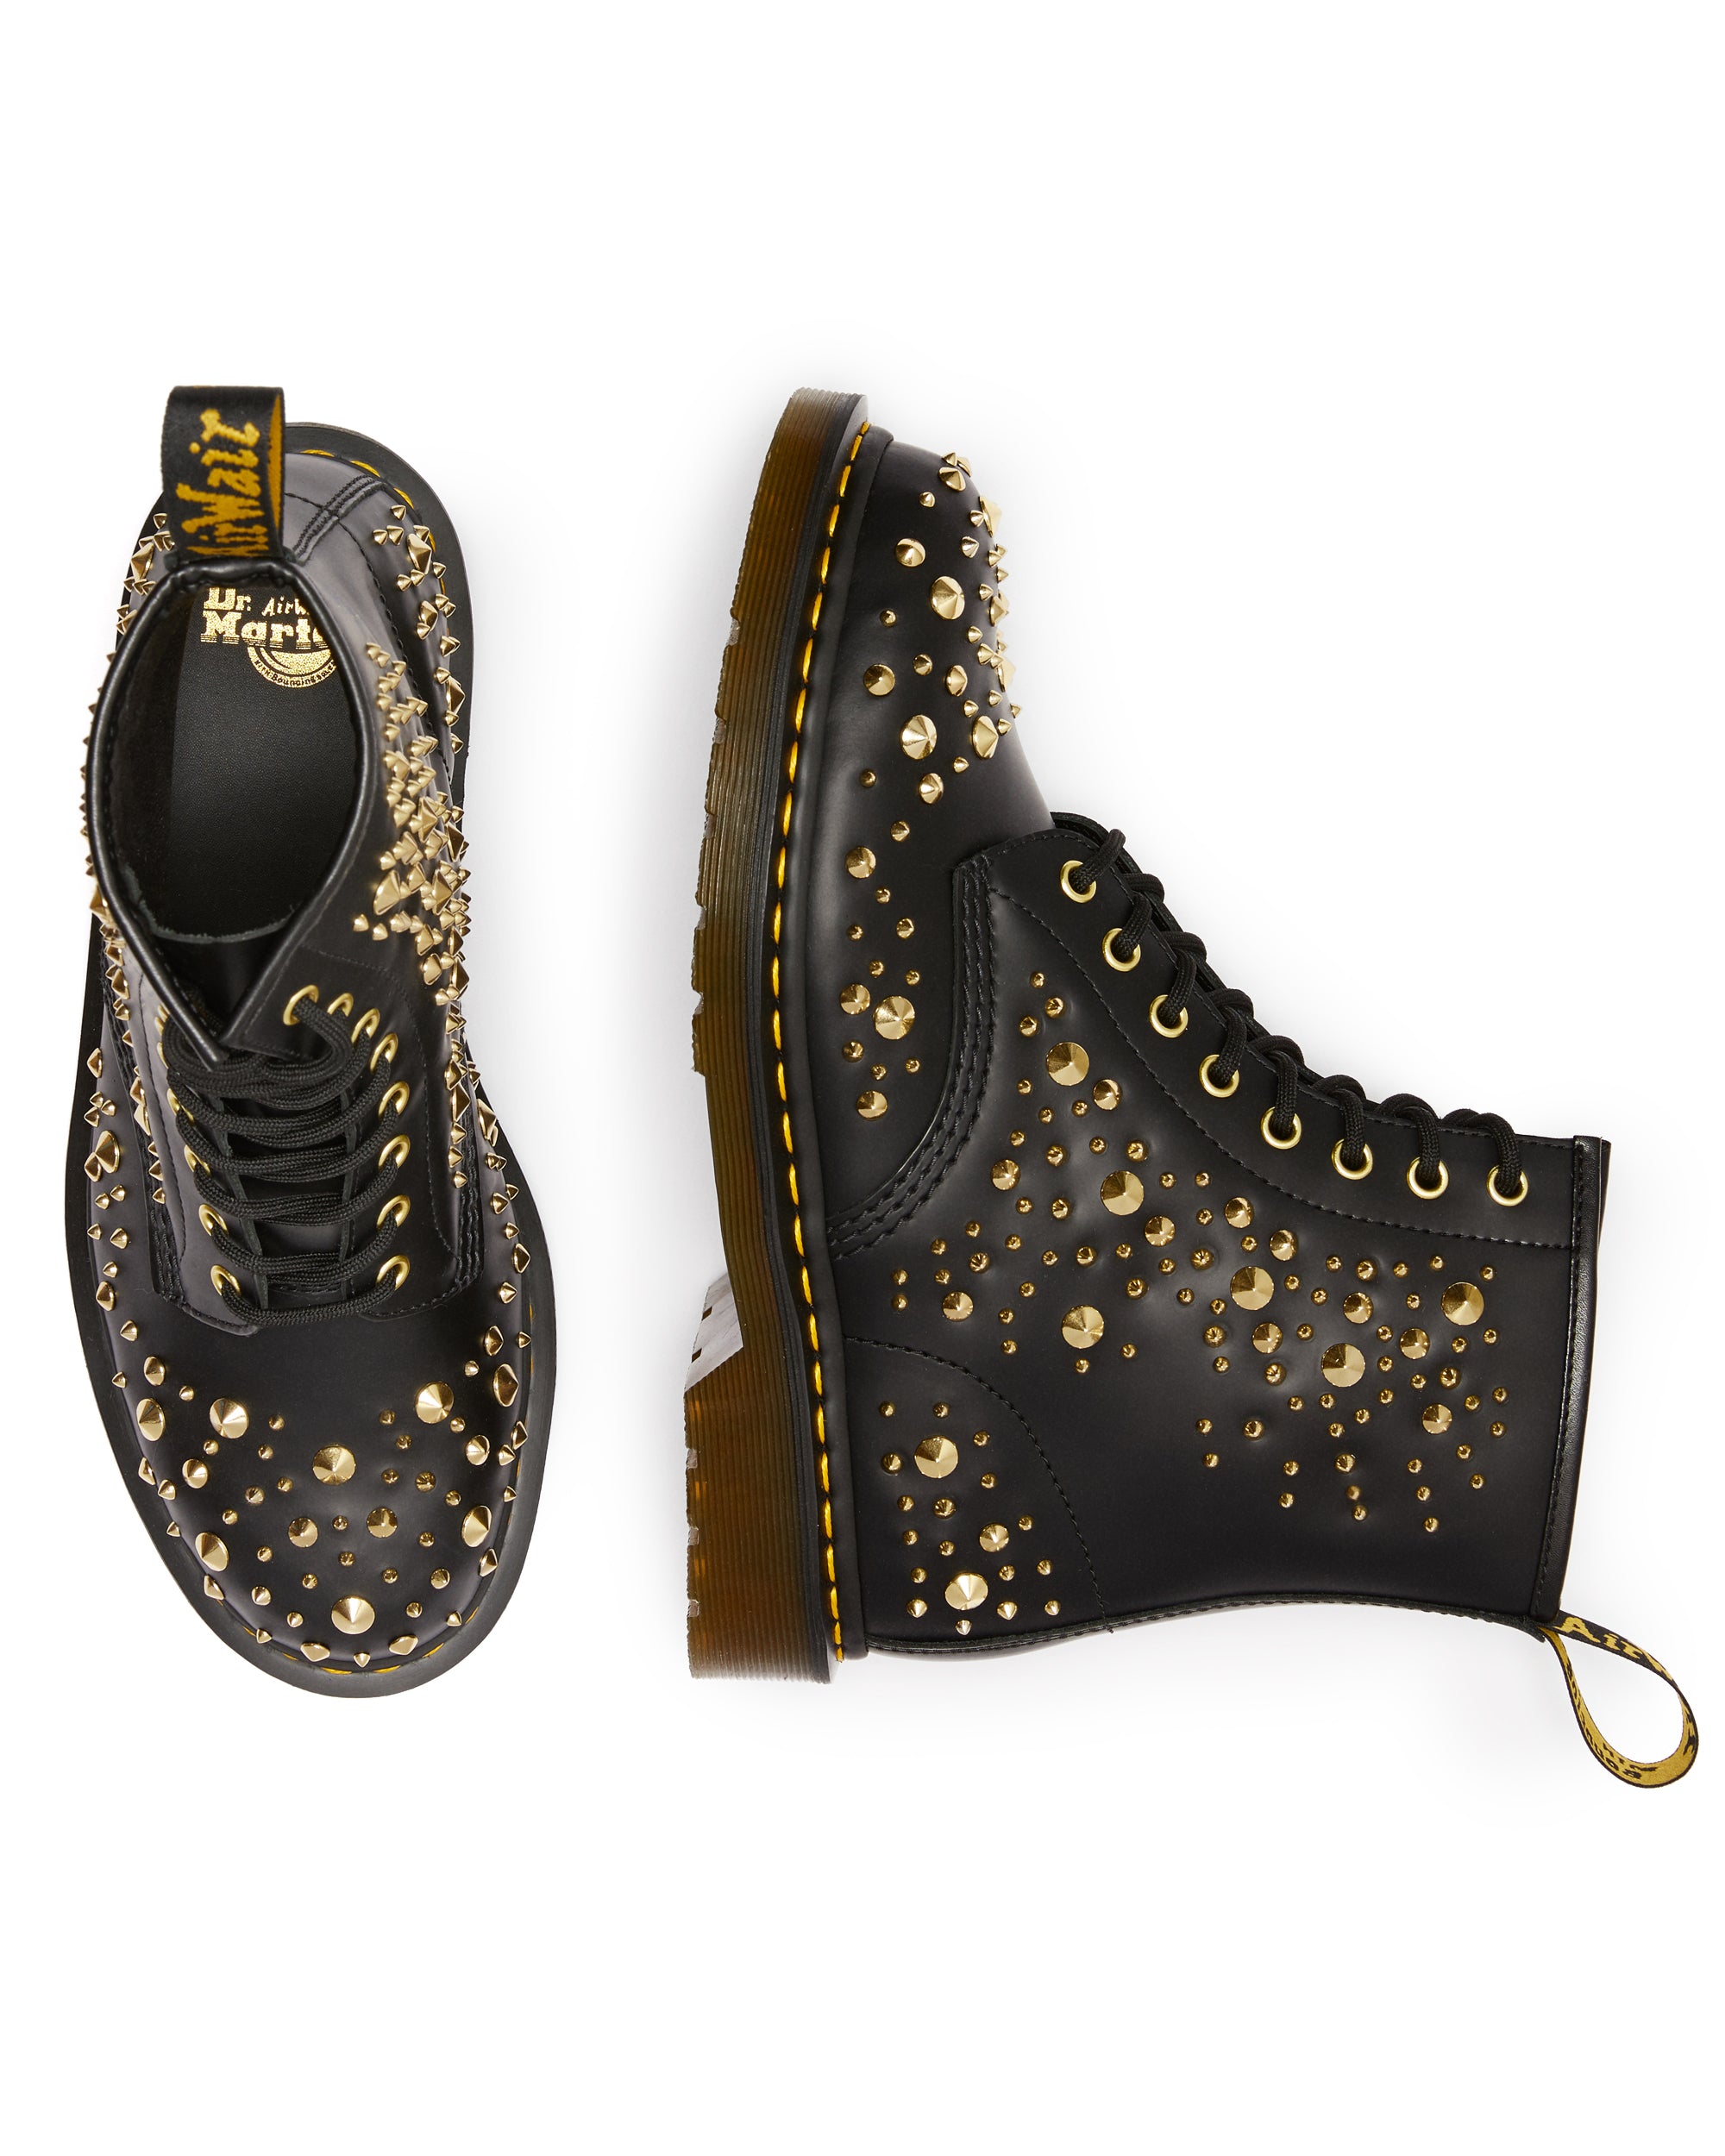 1460 Midas Black Smooth Studded Leather Lace Up Boots